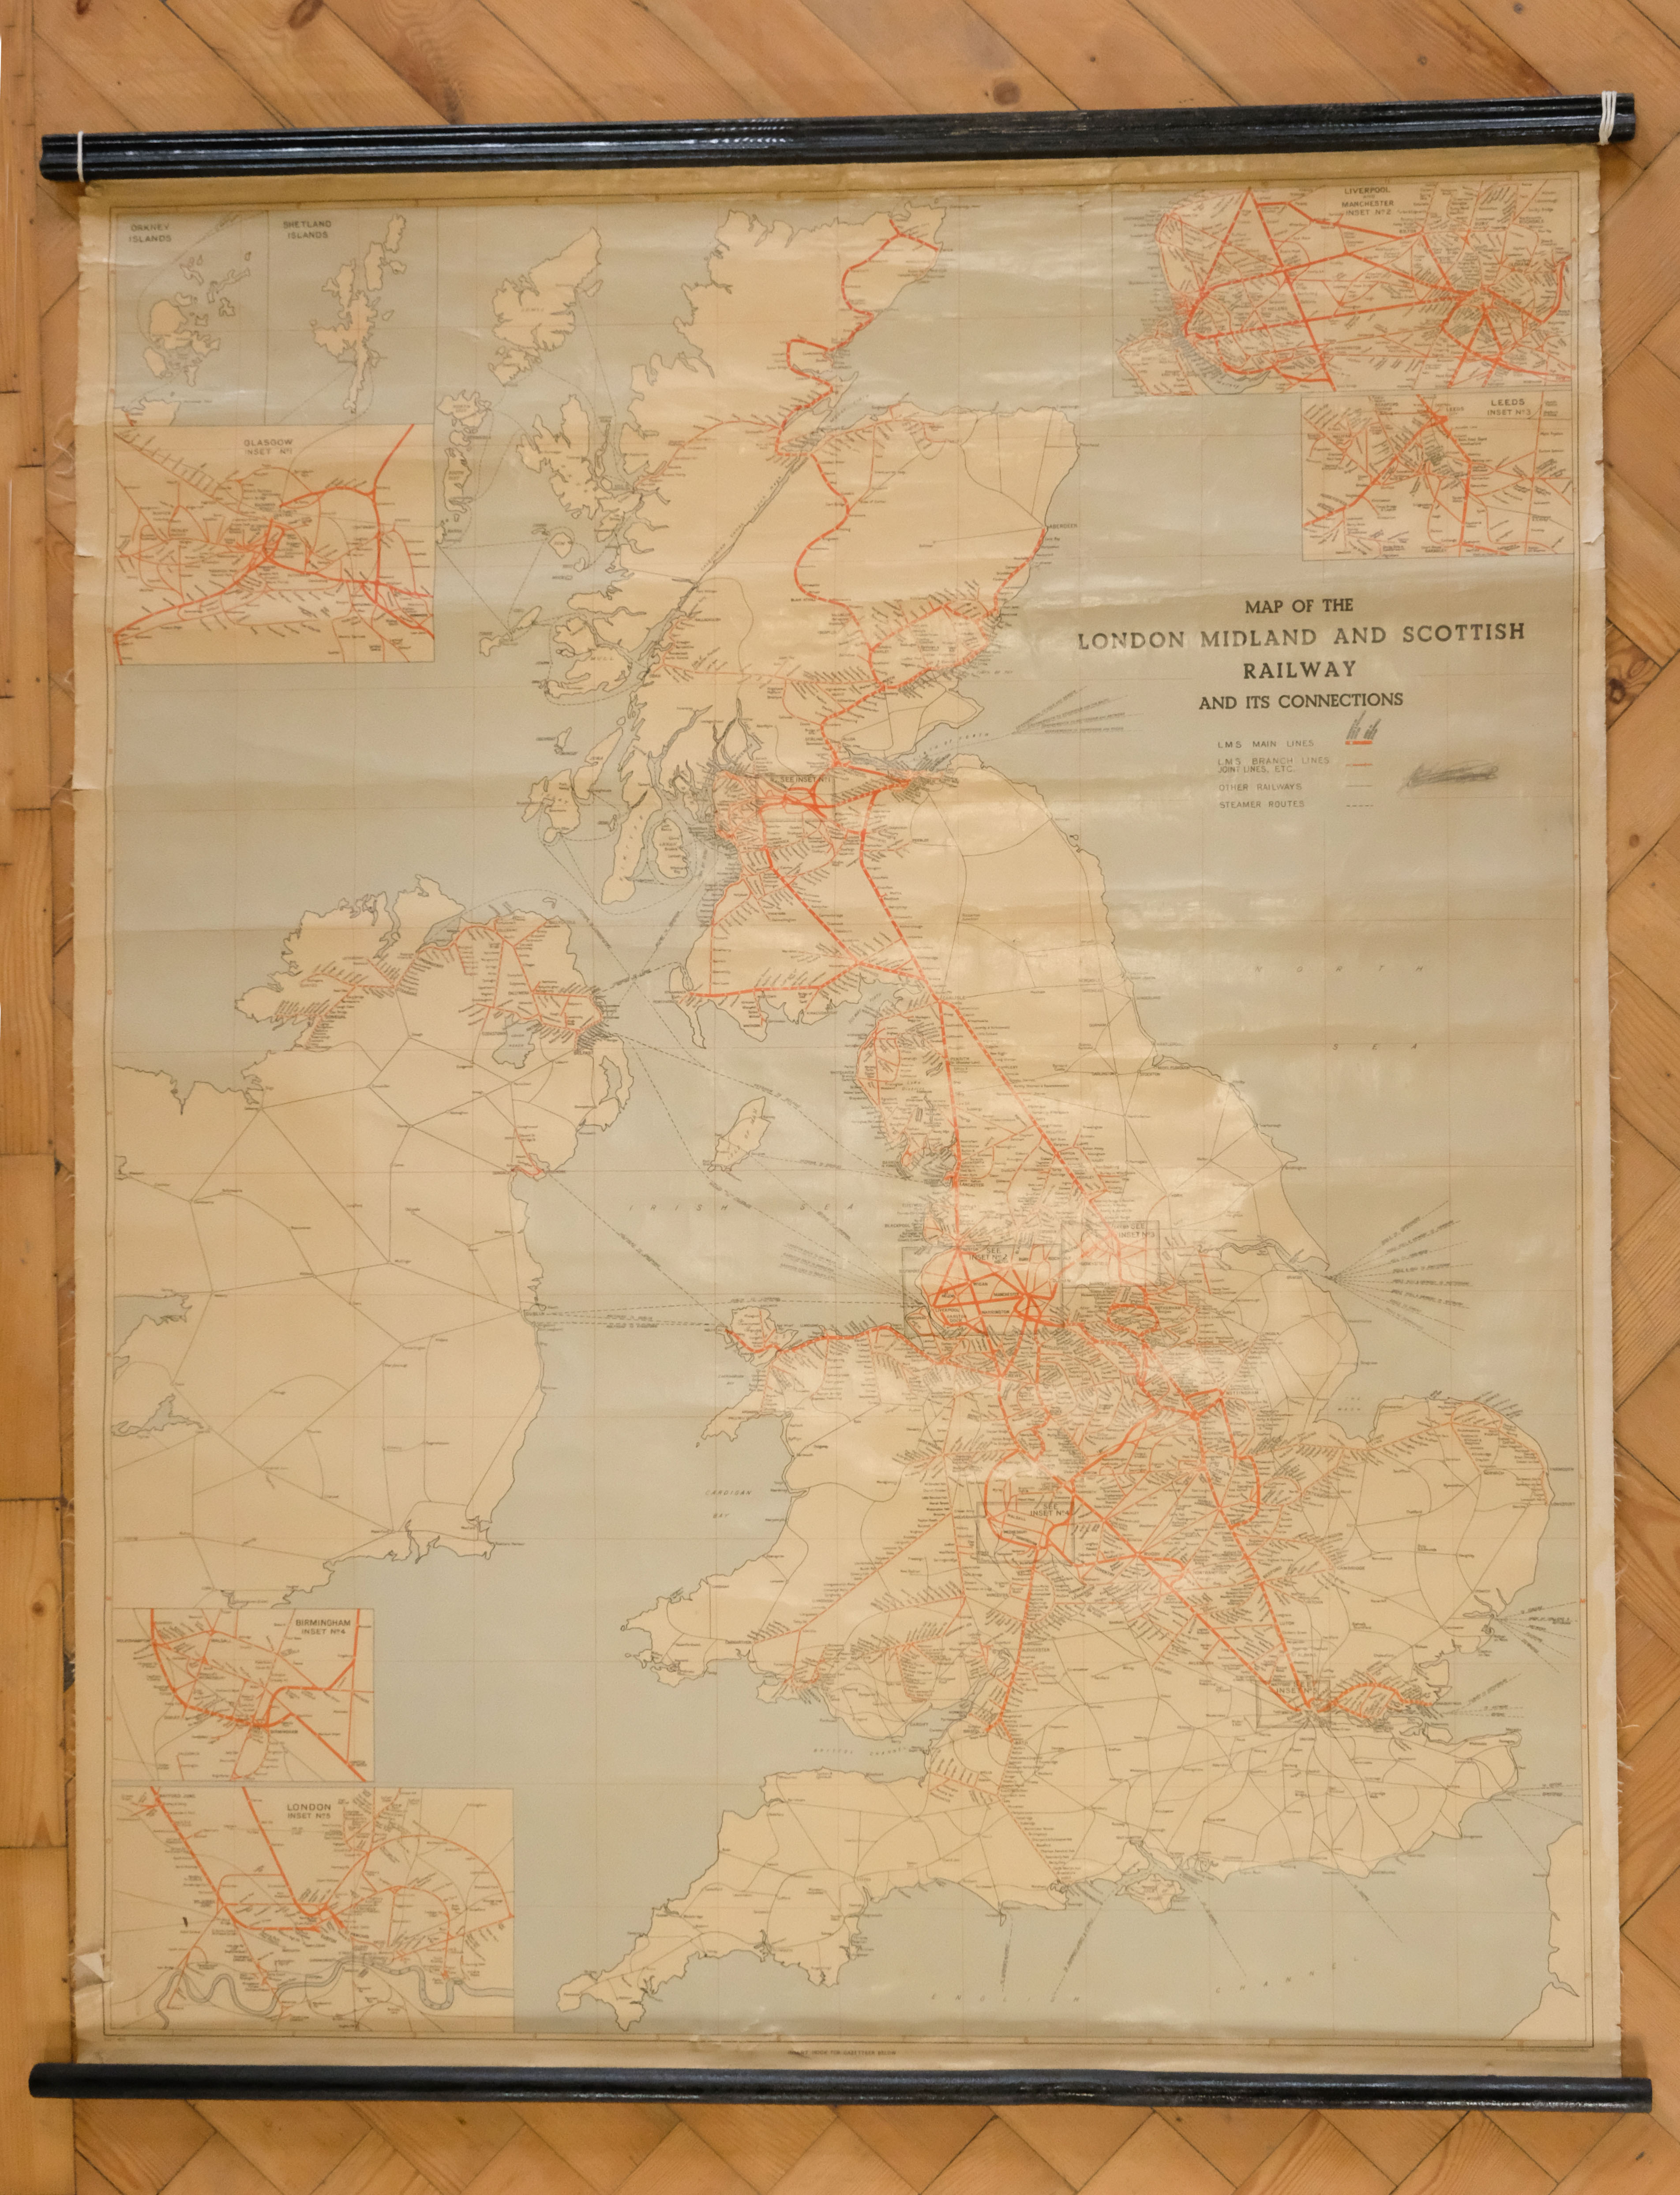 A large map of The London Midland and Scottish Railway and its connections, 1939, 100 cm x 123 cm